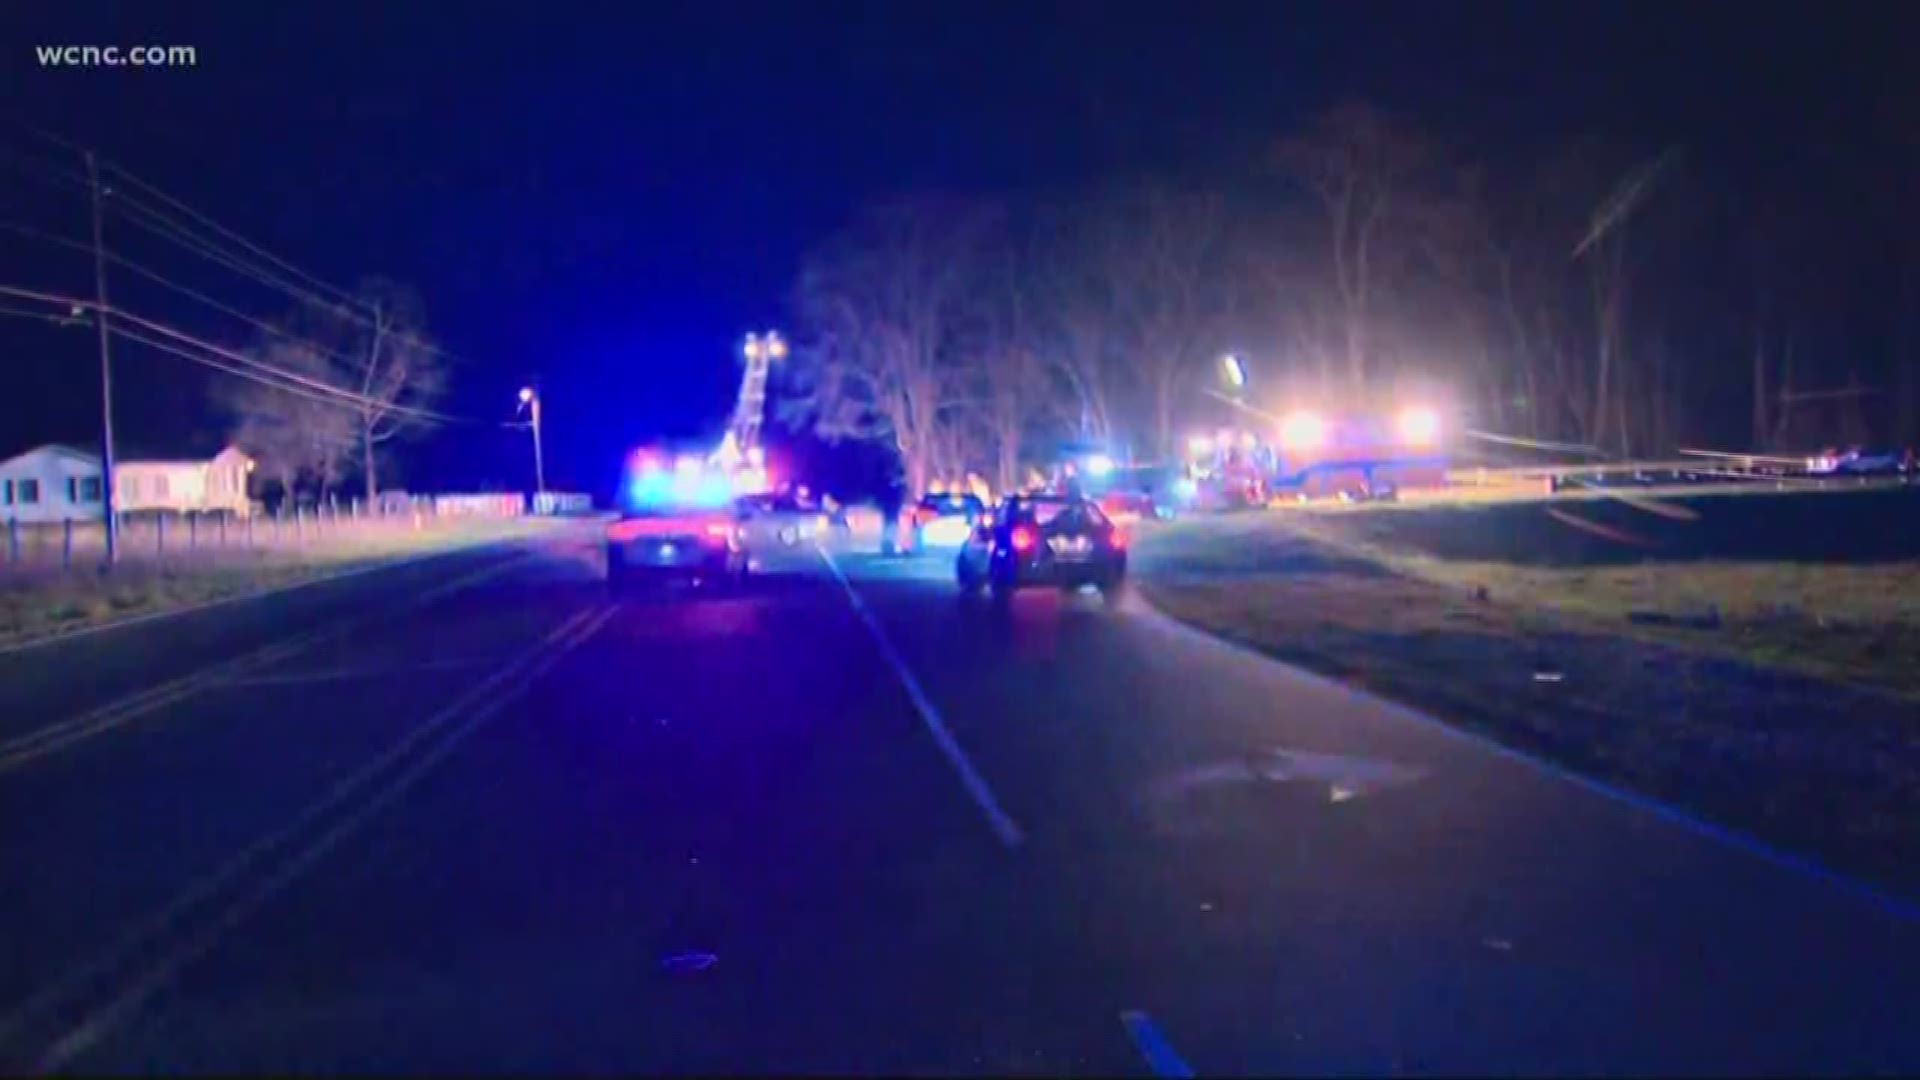 State troopers are investigating after a motorcyclist was killed in a crash near Hickory Ridge High School in Harrisburg Monday night.